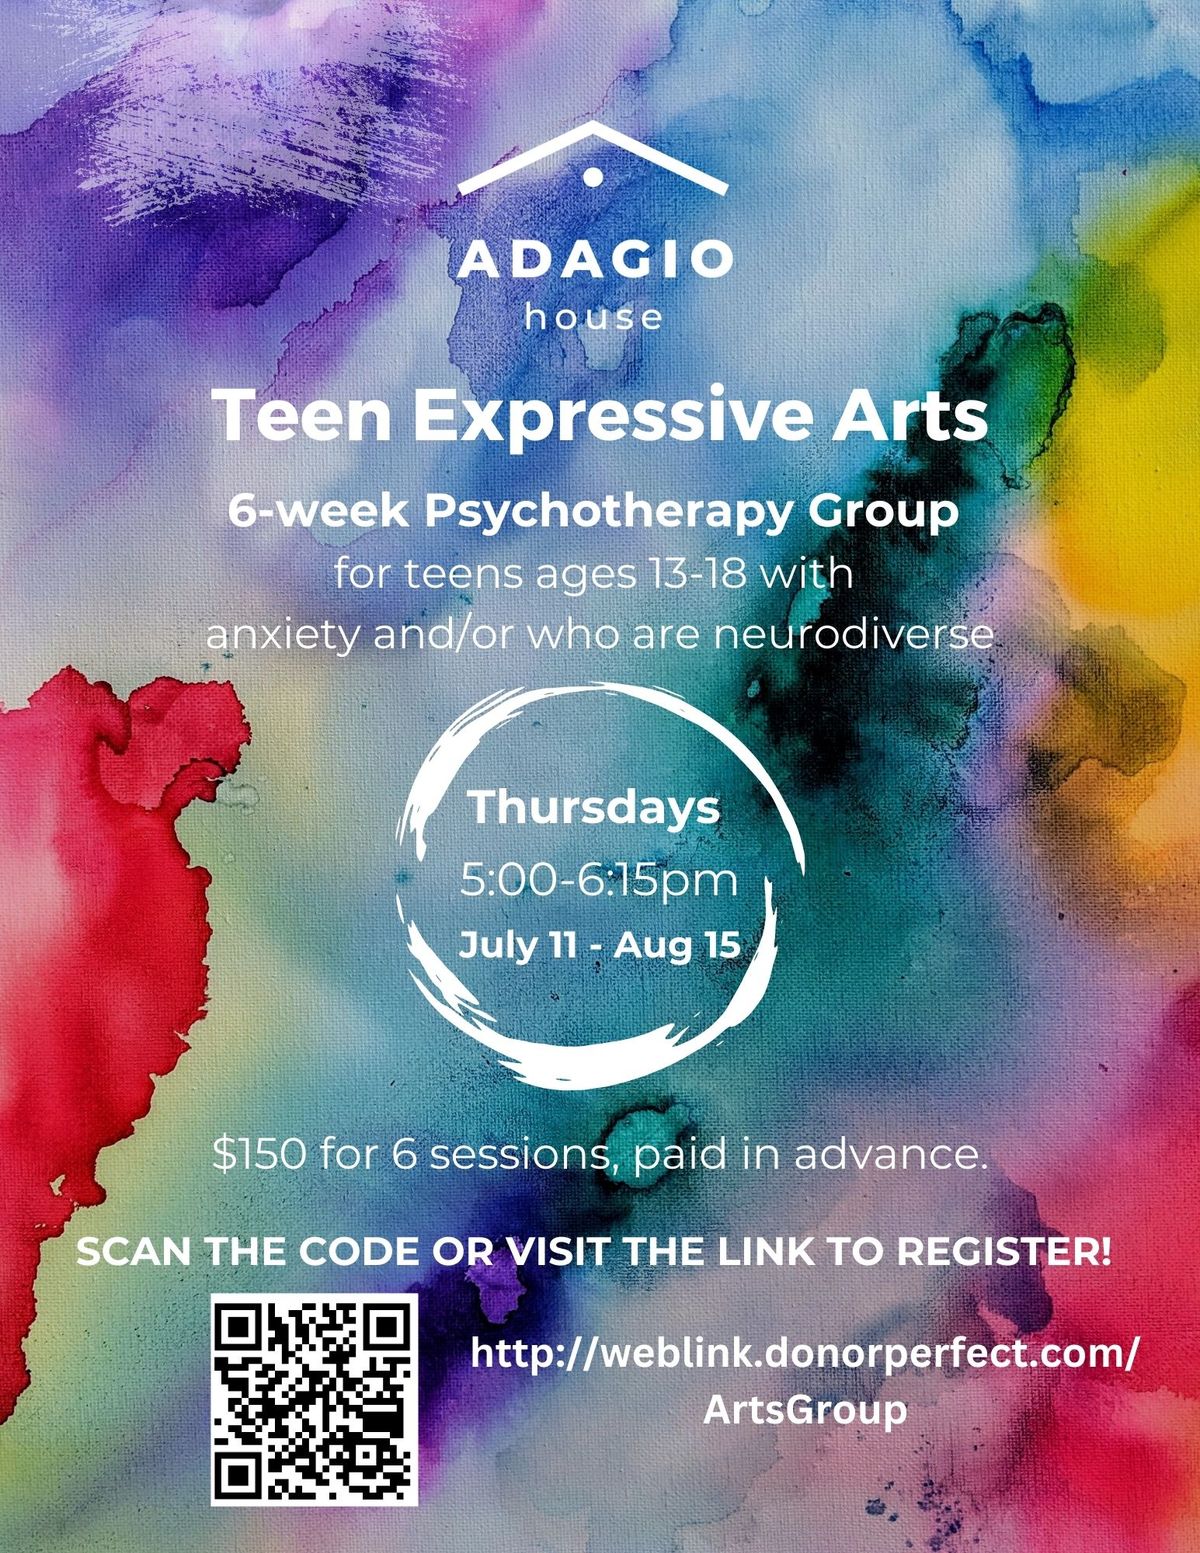 Teen Expressive Arts - Psychotherapy Group